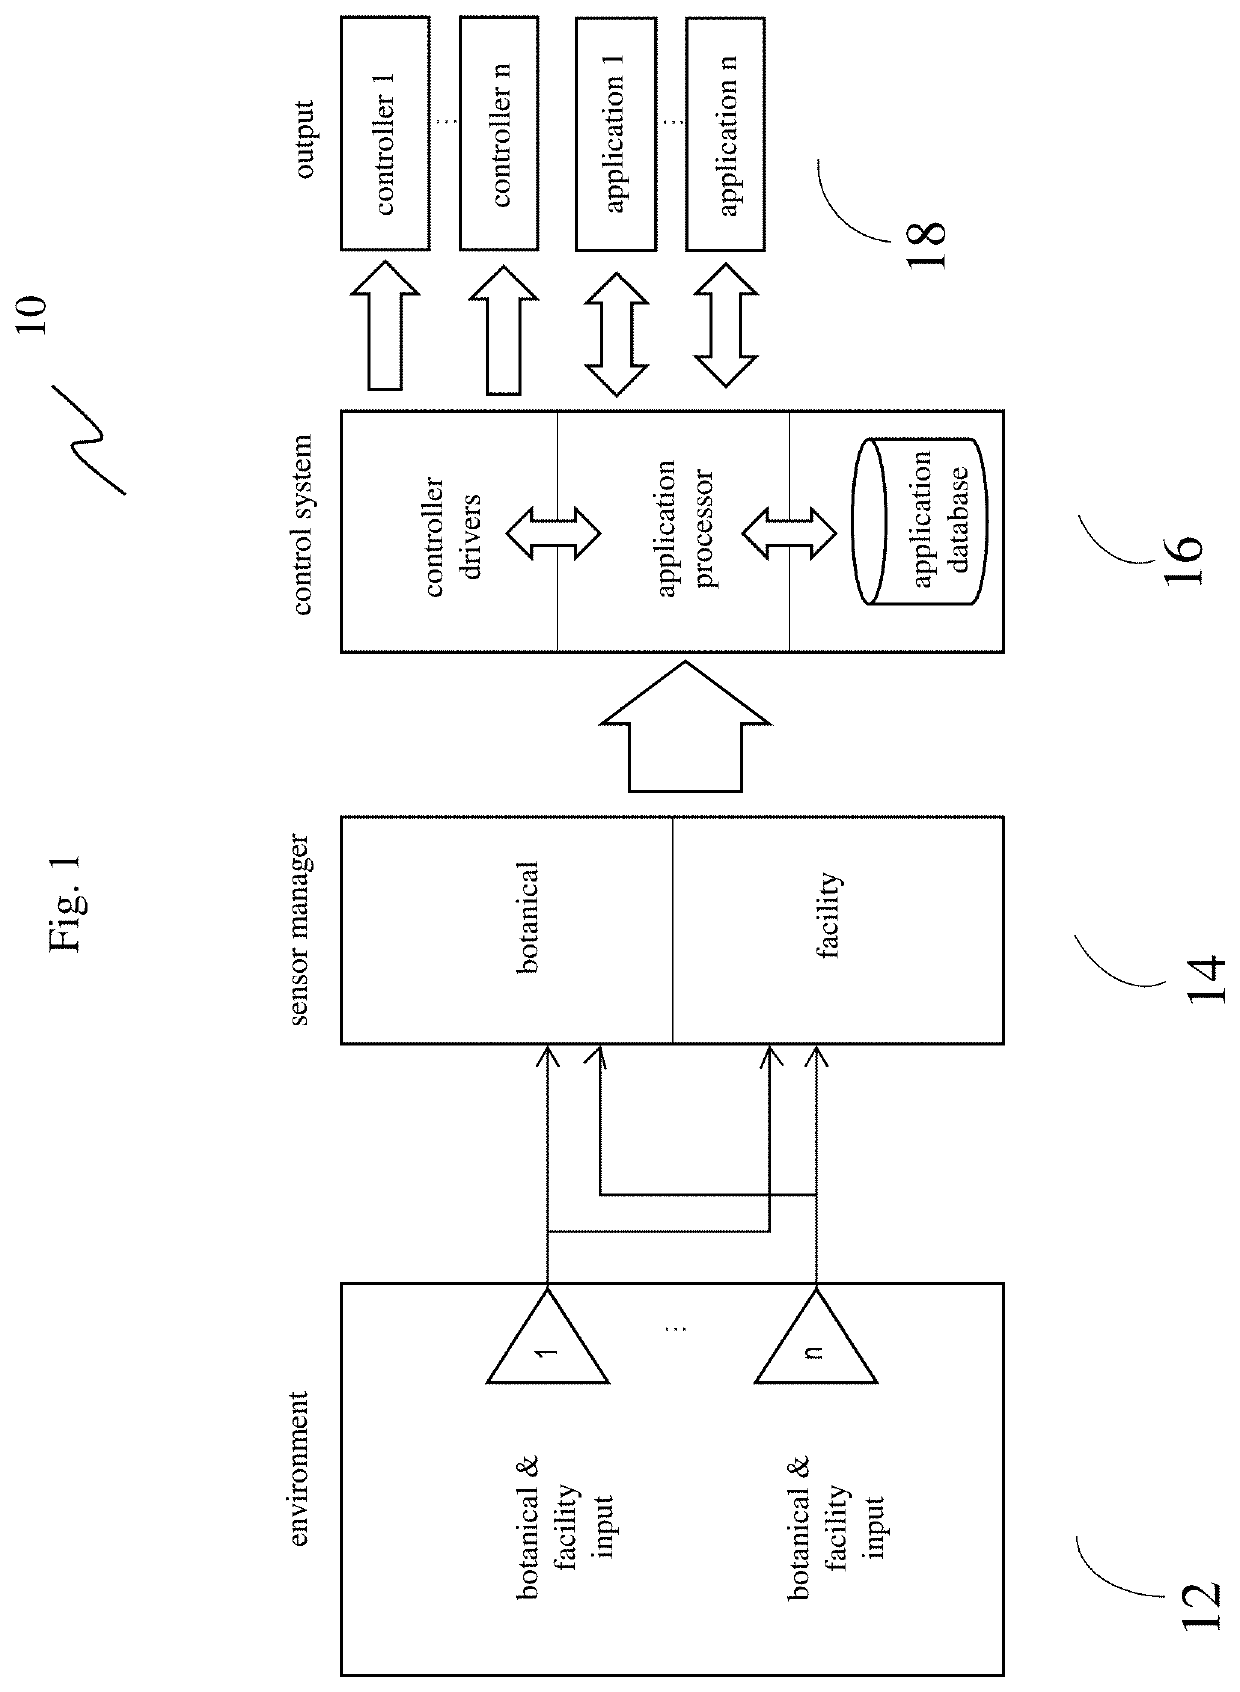 Spectral deficiency driven control systems and methods in plant growth automation